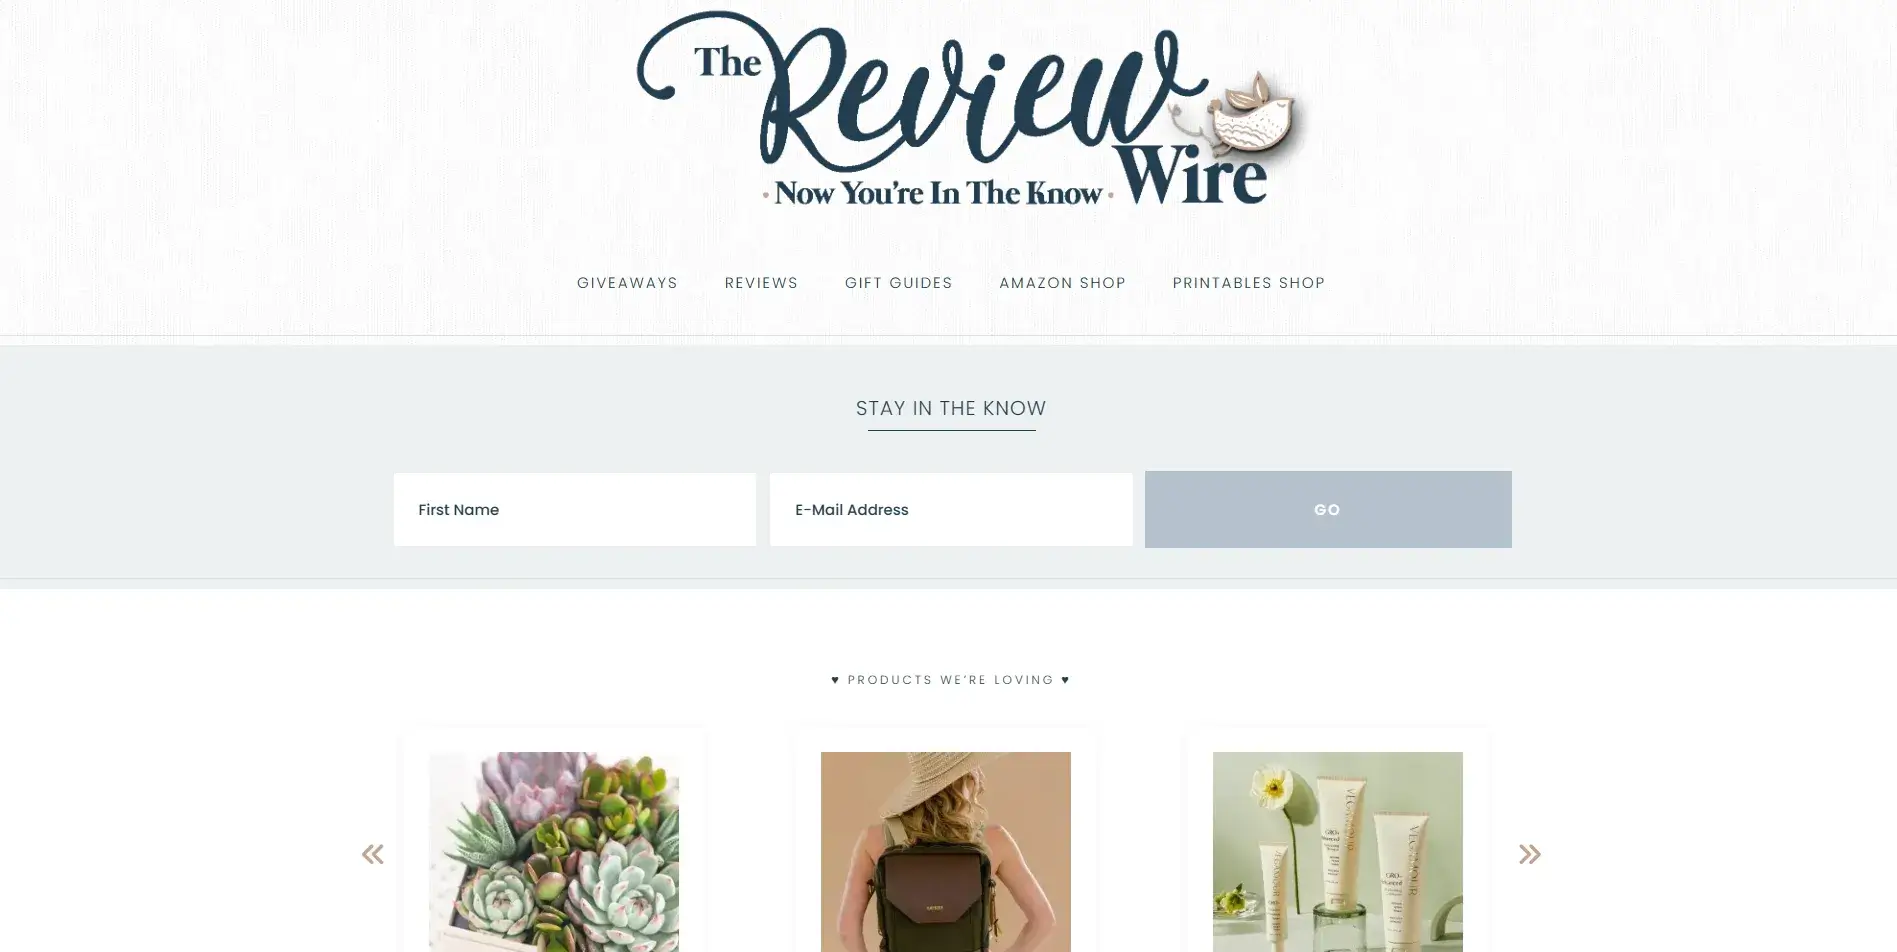 The Review Wire